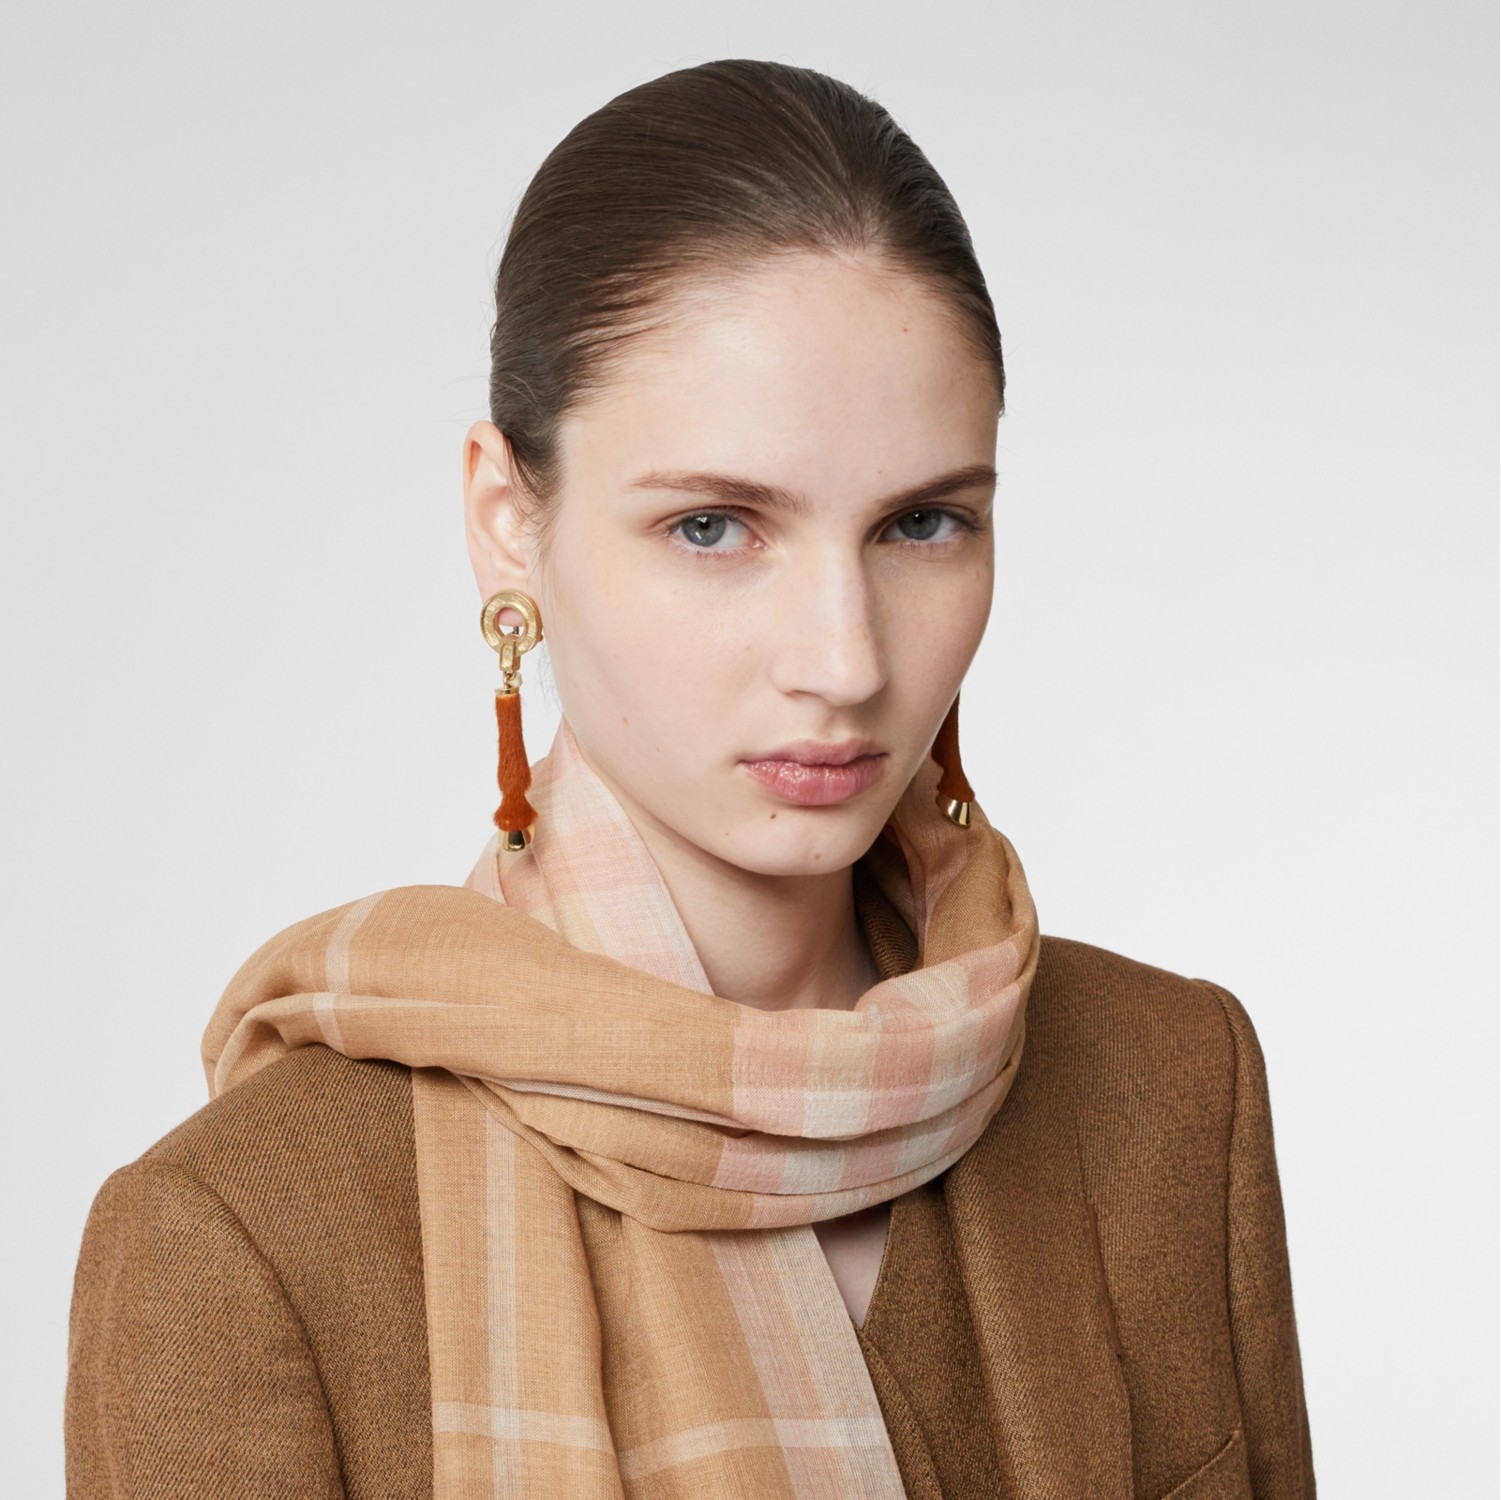 Lightweight Check Wool and Silk Scarf